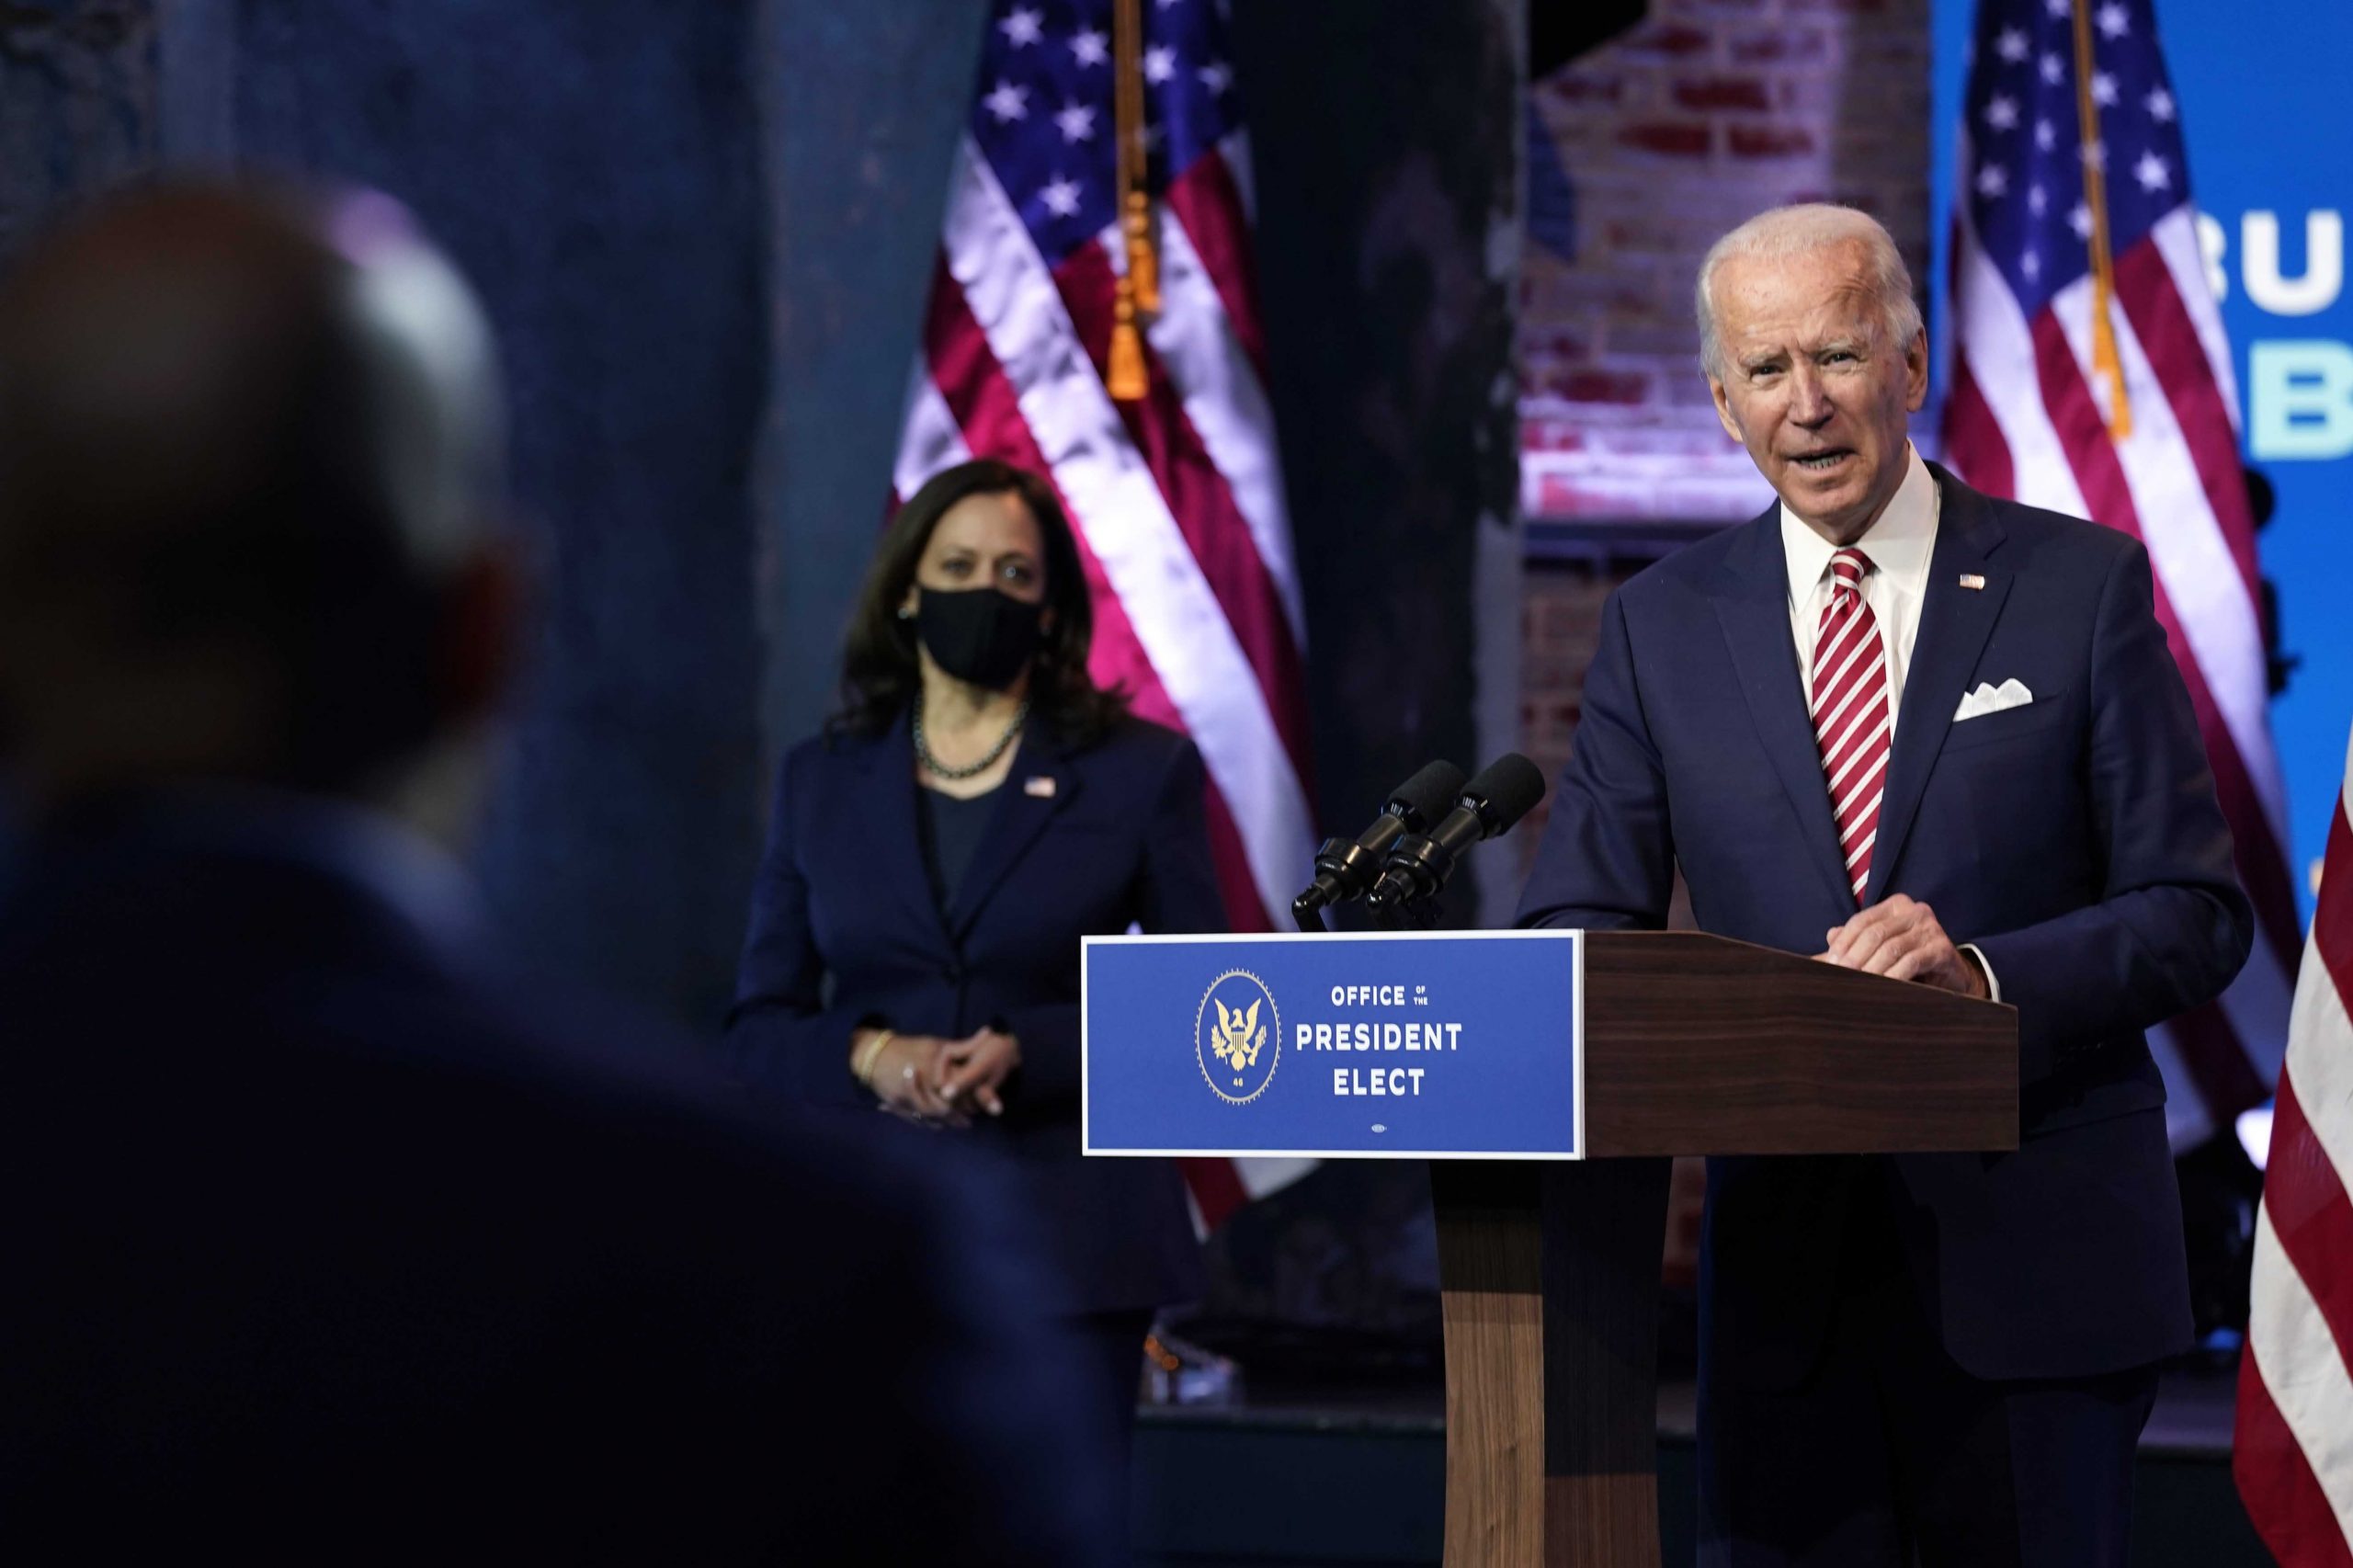 Transition delay results in awkward hole between Biden and Harris in intel entry